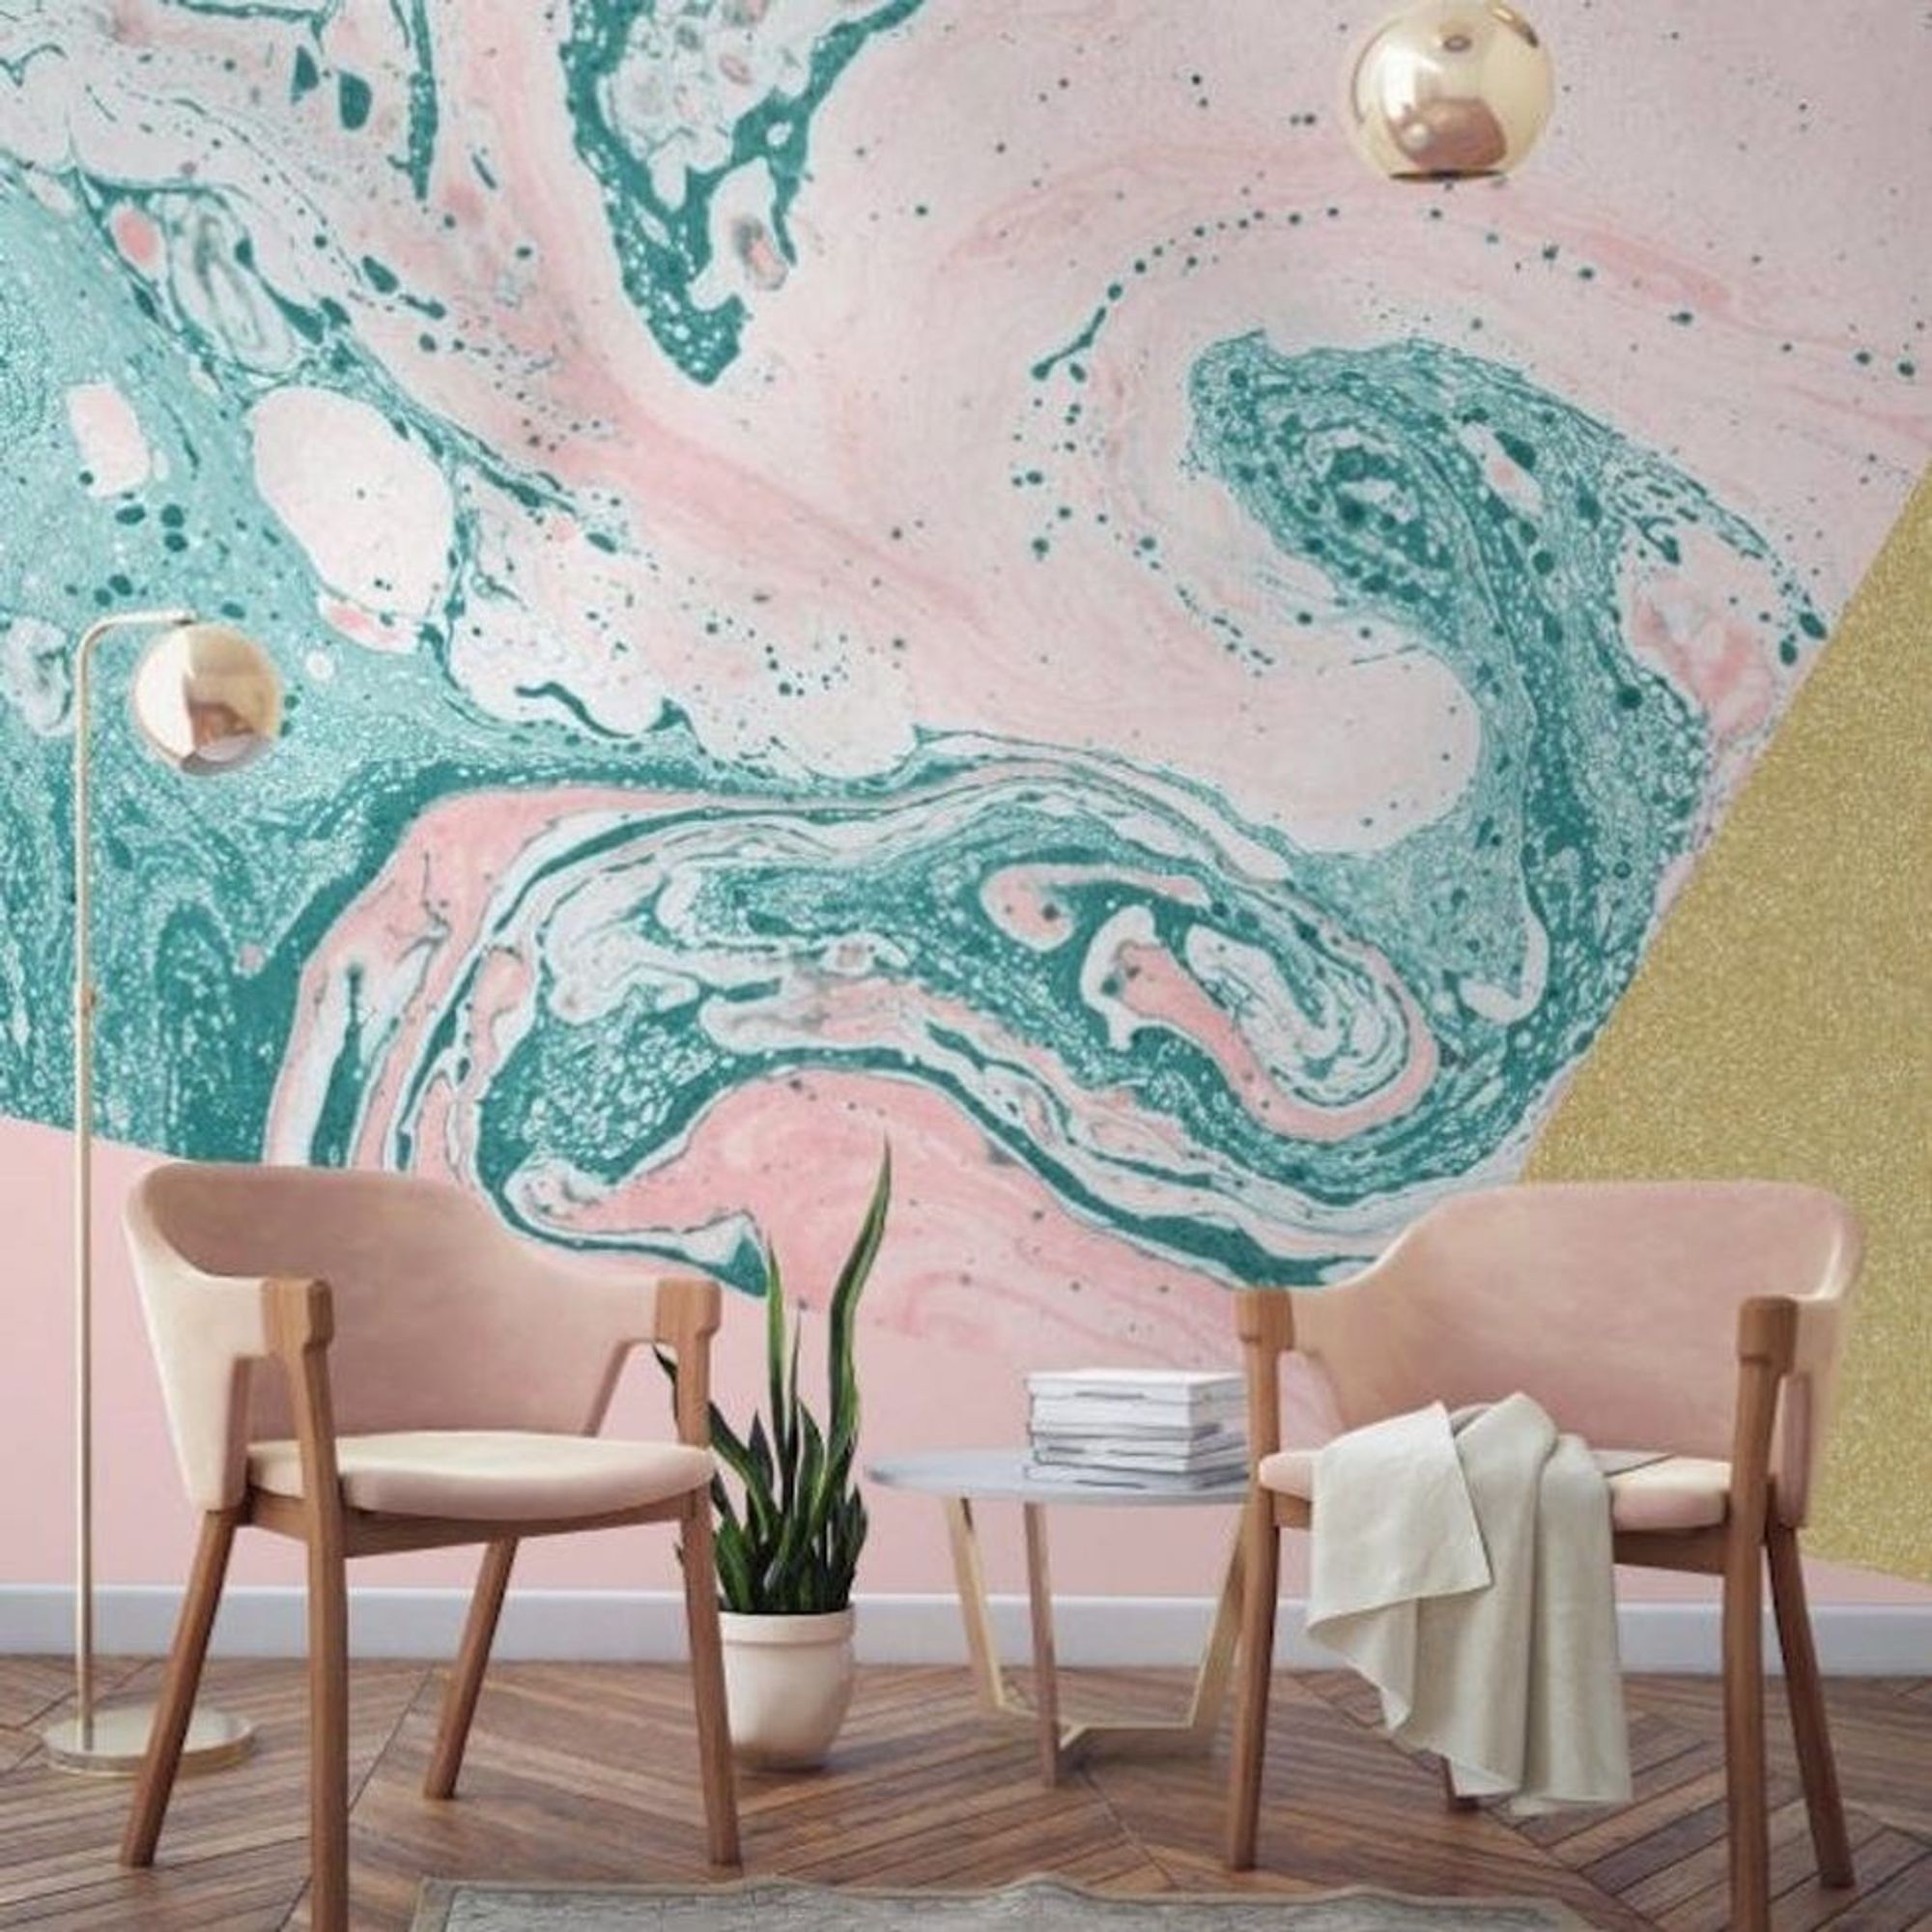 Marble Wallpaper Is The Latest Trend You Ll Want Your Home To Rock